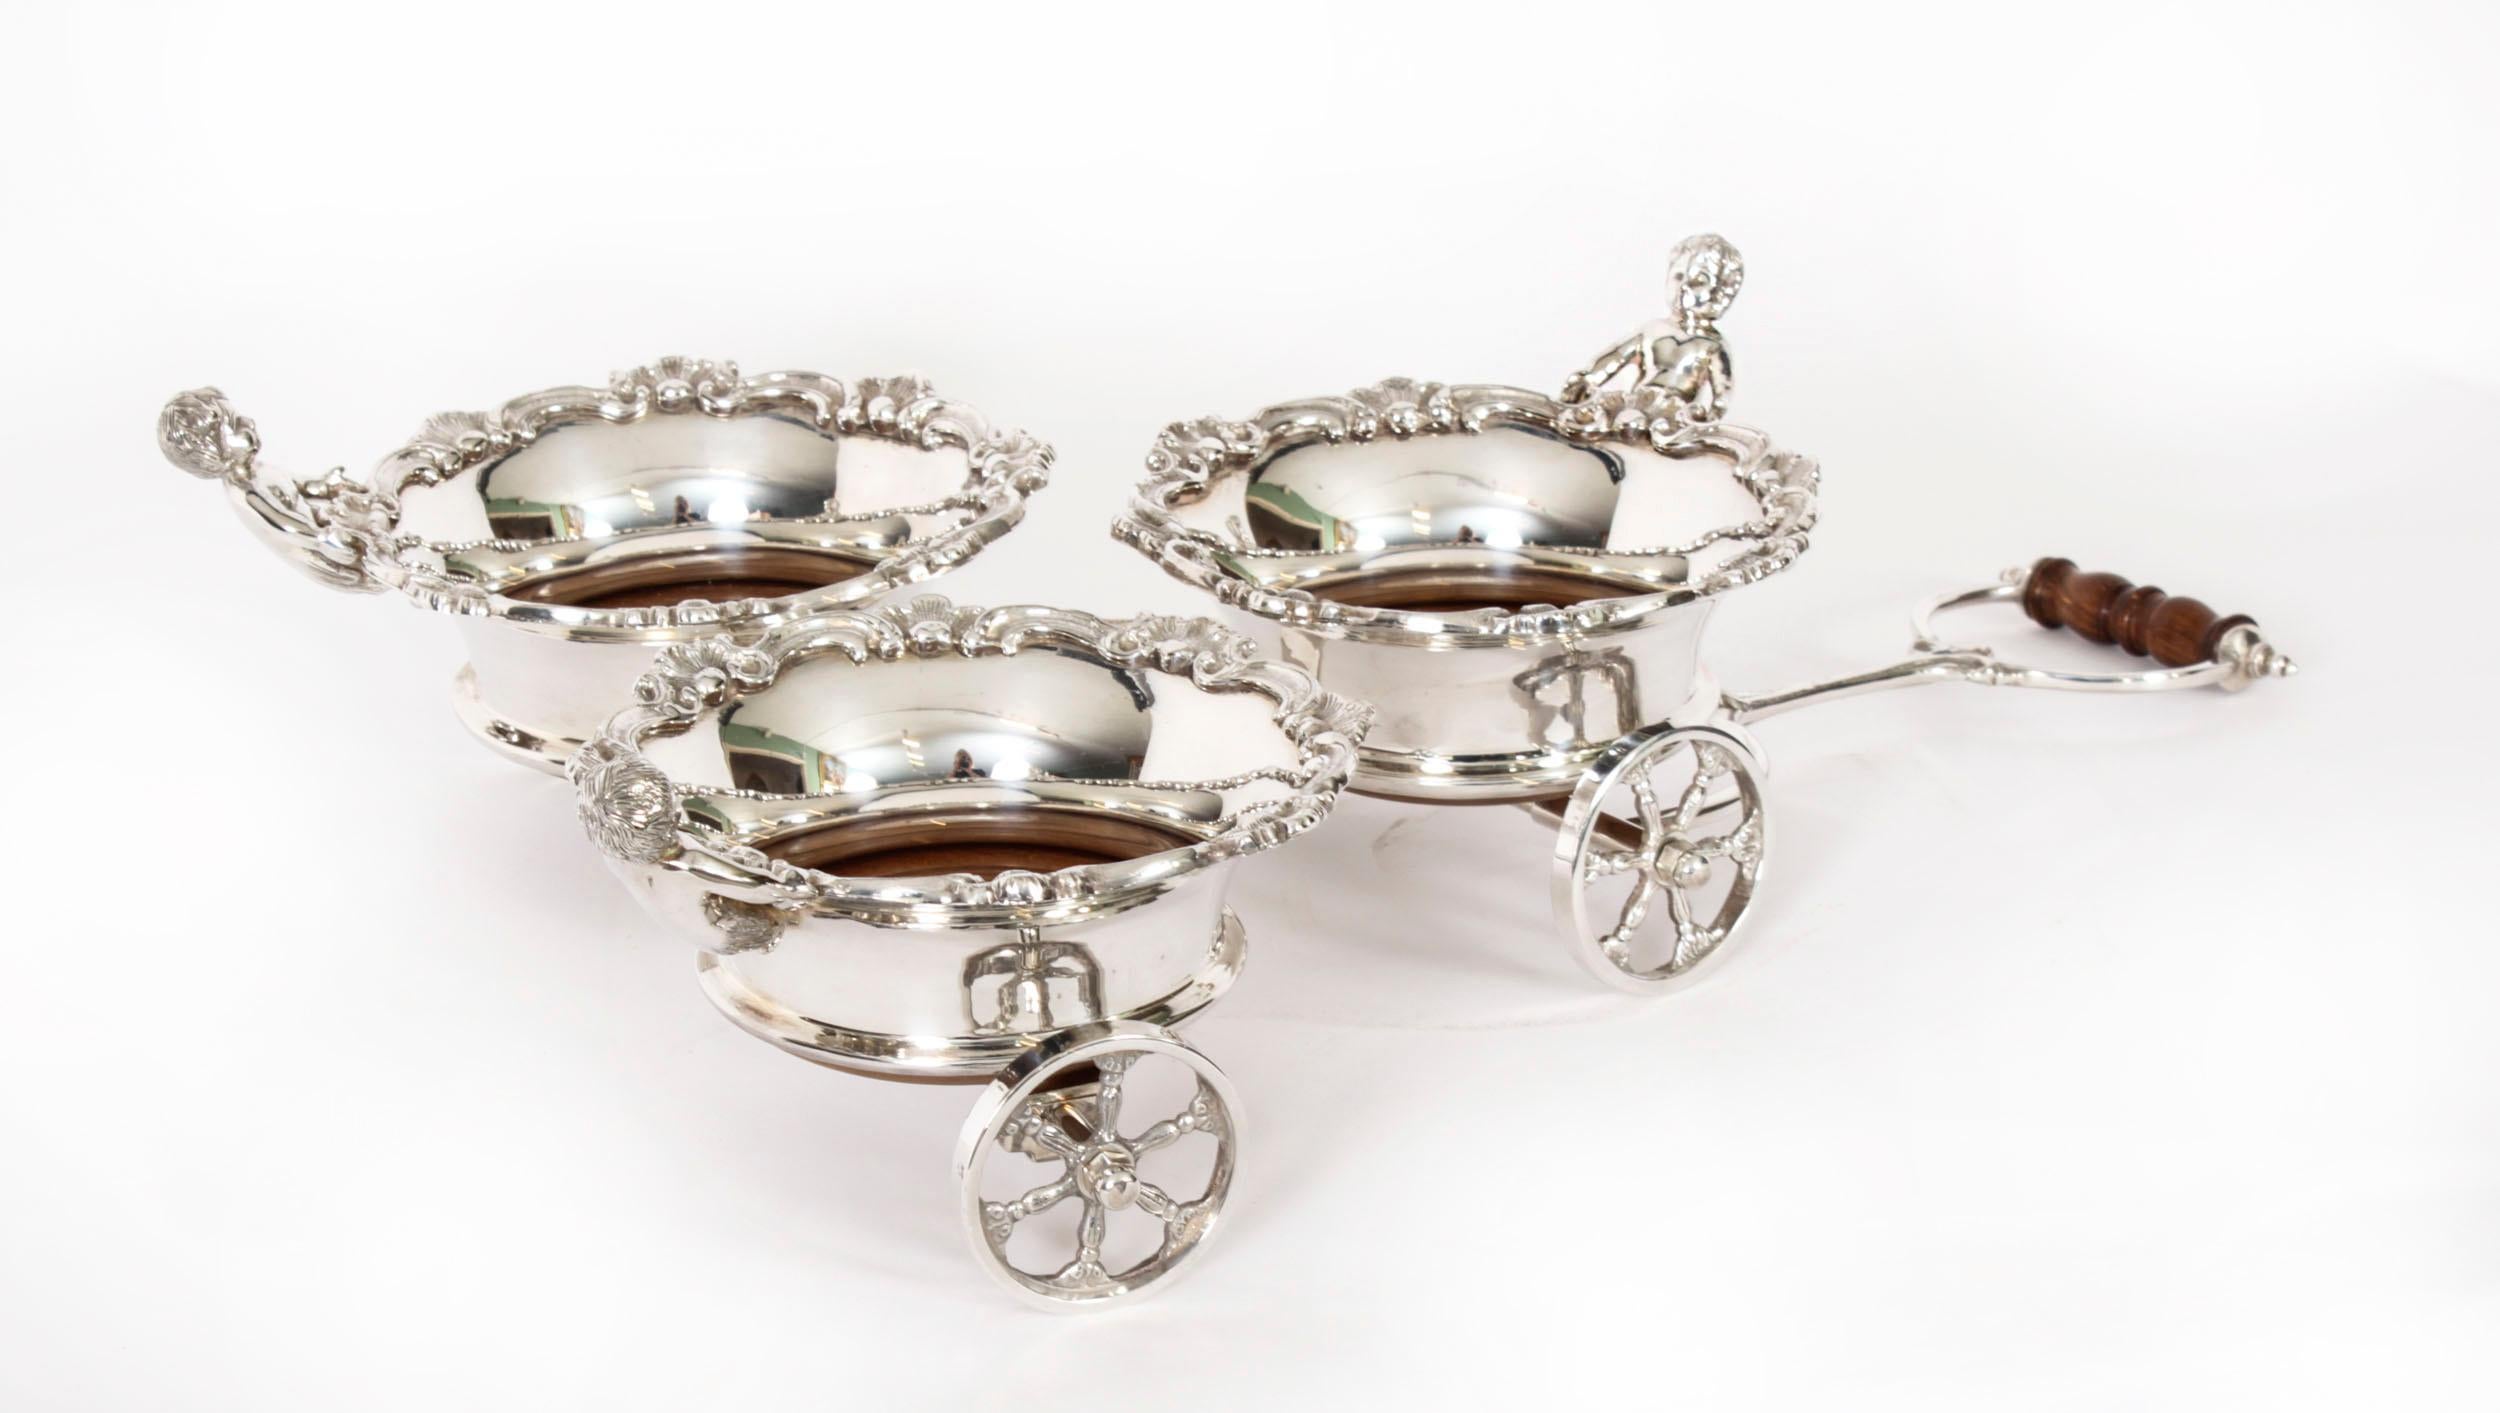 This is a superb antique English silver plated triple bottle coaster, circa 1930 in date.
 
The three coasters are arranged in a triangle on wheels, each are decorated with an acanthus rim and a cherub, the handle at the front steers the coaters.
